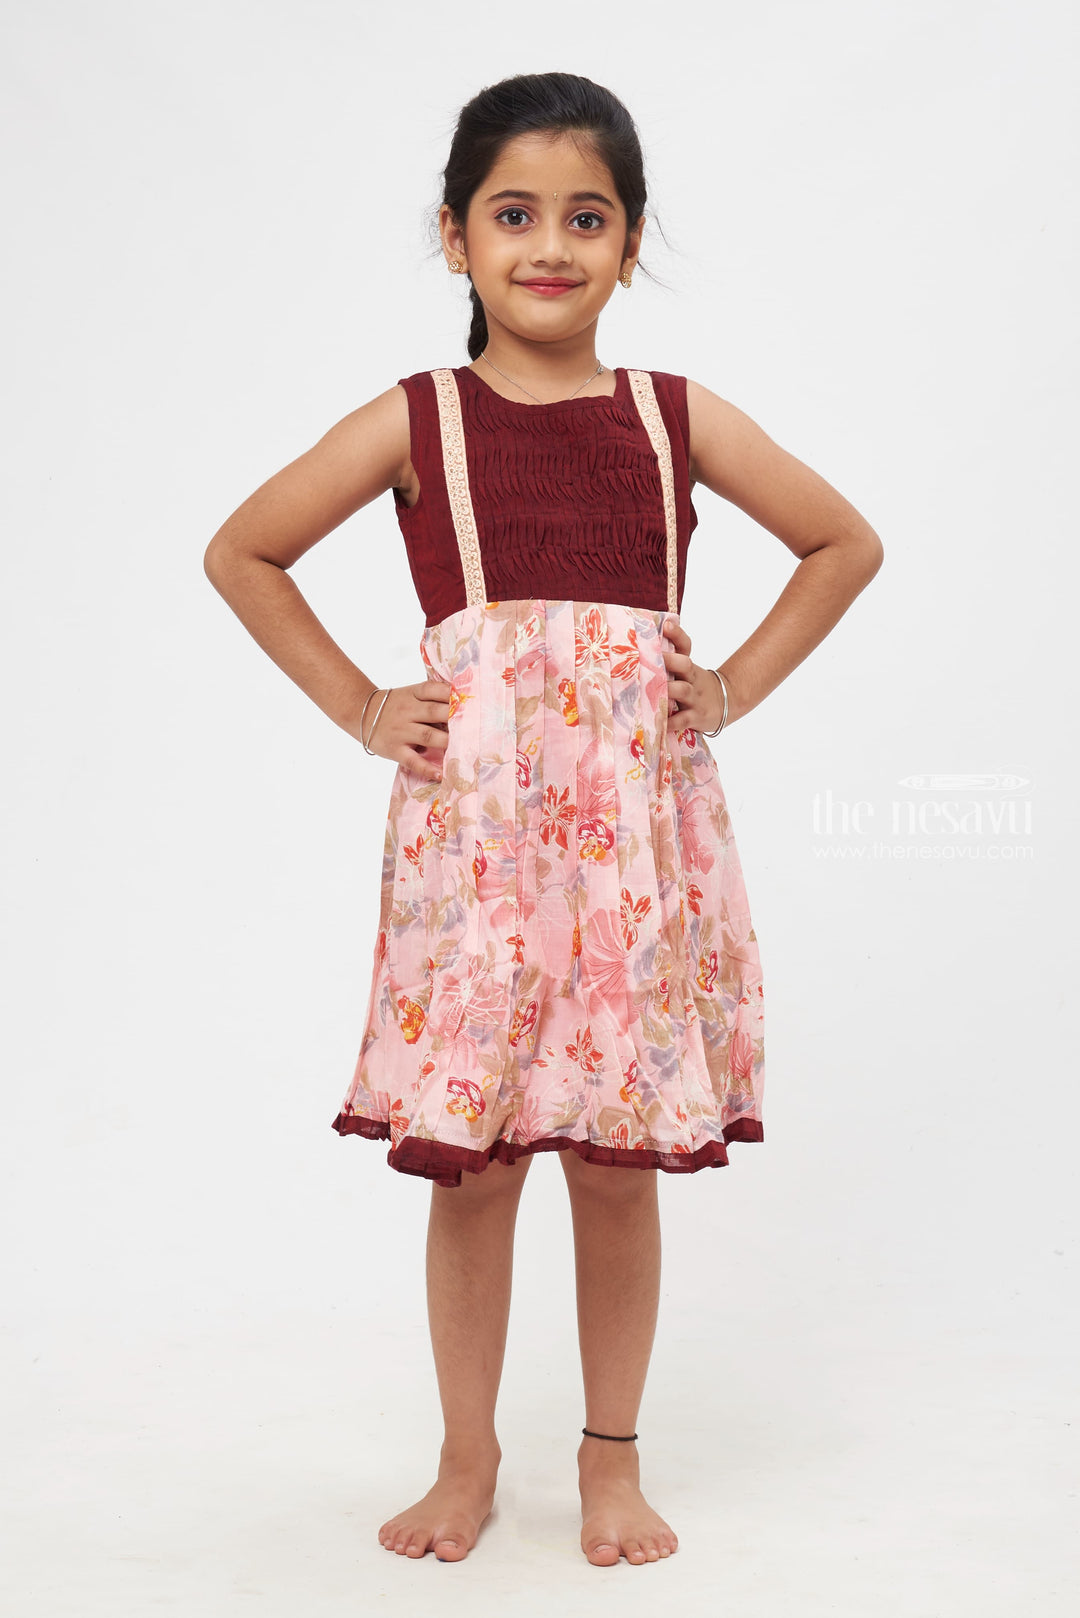 The Nesavu Girls Cotton Frock Blossom Bliss Maroon and Pink Floral Dress with Delicate Lace Nesavu 14 (6M) / Pink / Poly Crepe GFC1167B-14 Timeless Cotton Frocks for Girls | Girls Daily Wear Cotton Frocks | The Nesavu